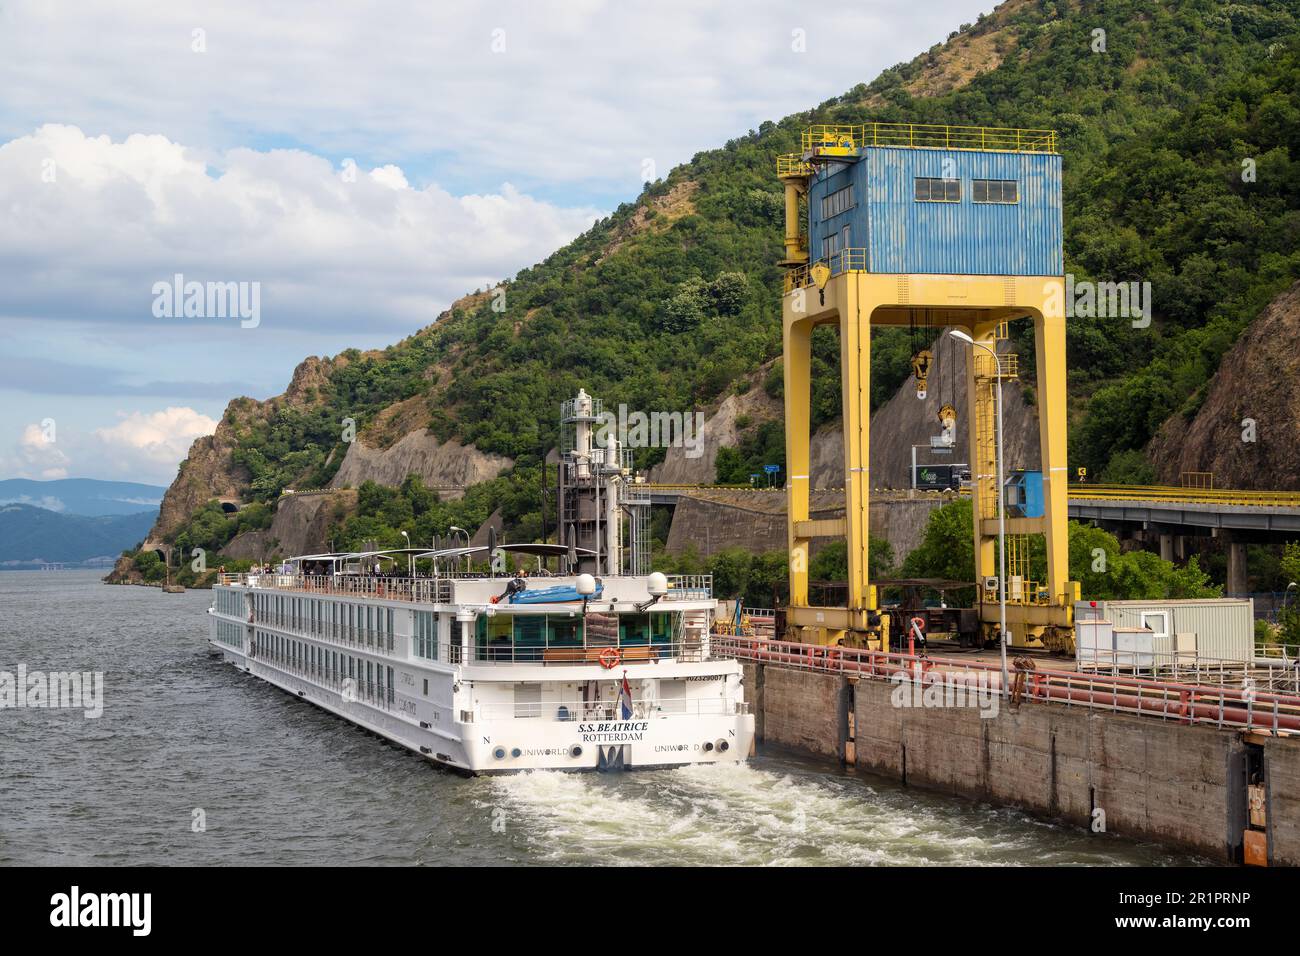 The locks at Iron Gate Gorge on the Danube between Serbia and Romania. Also supplies Hydro-electric power to the region. S.S. Beatrice passes through. Stock Photo